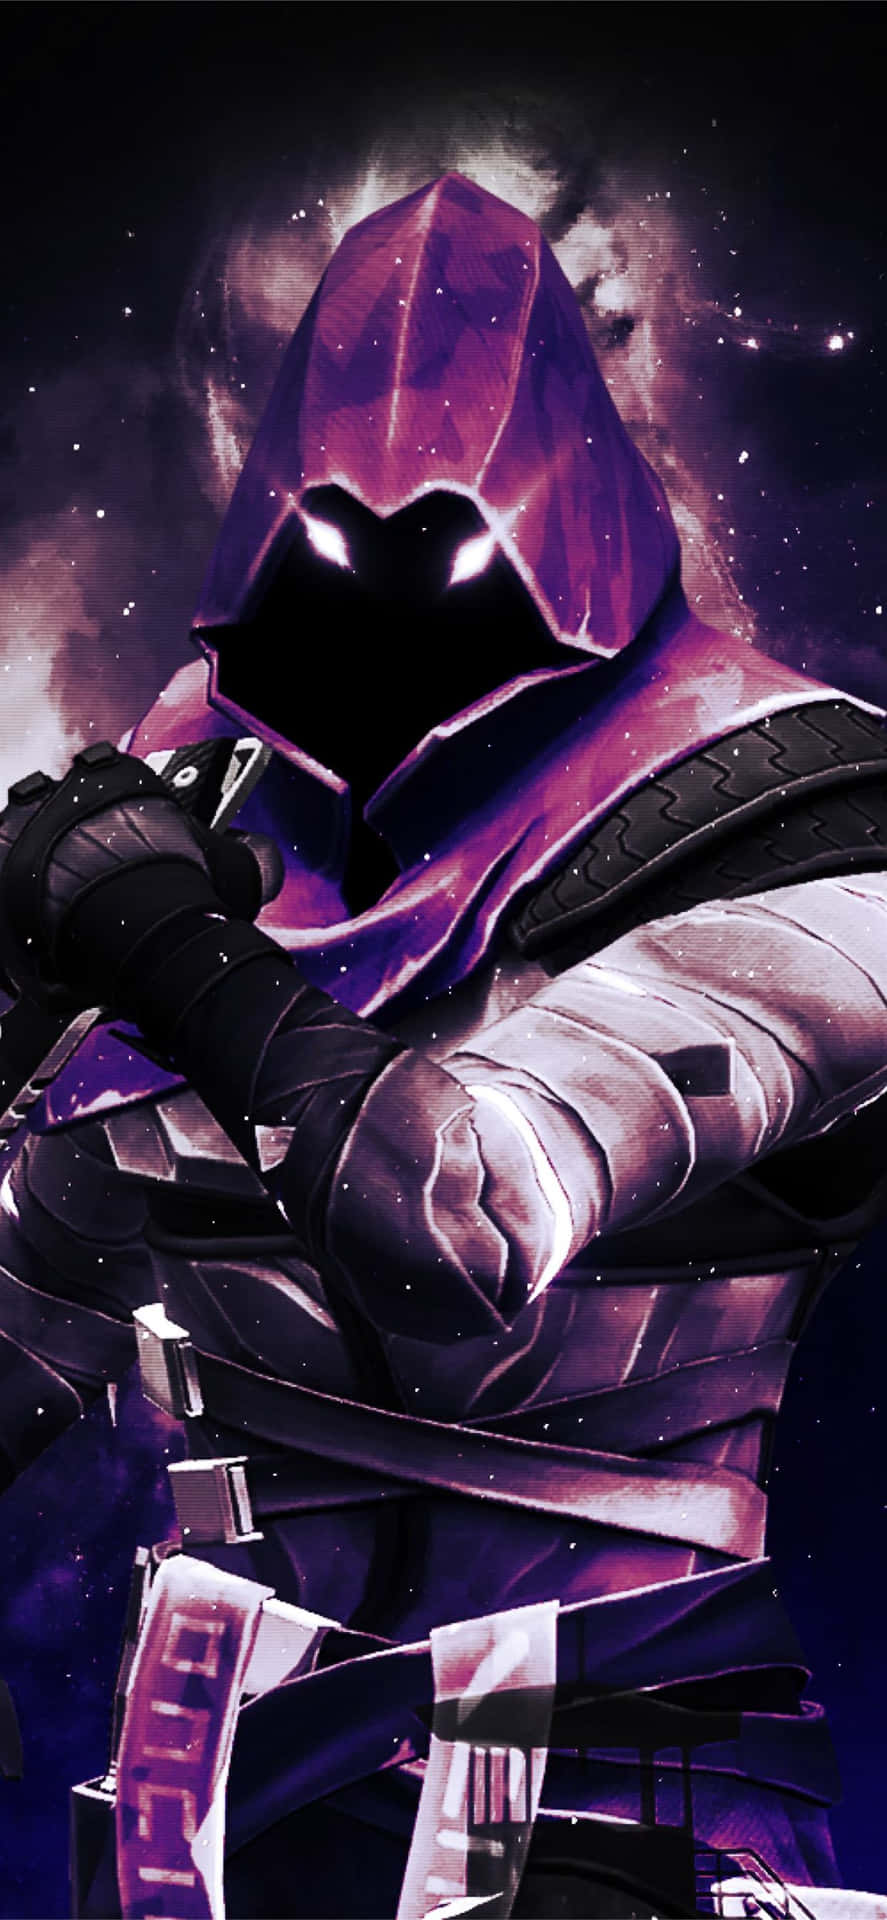 Enjoy the excitement, vibrancy and challenge of Fortnite with the Purple skin! Wallpaper